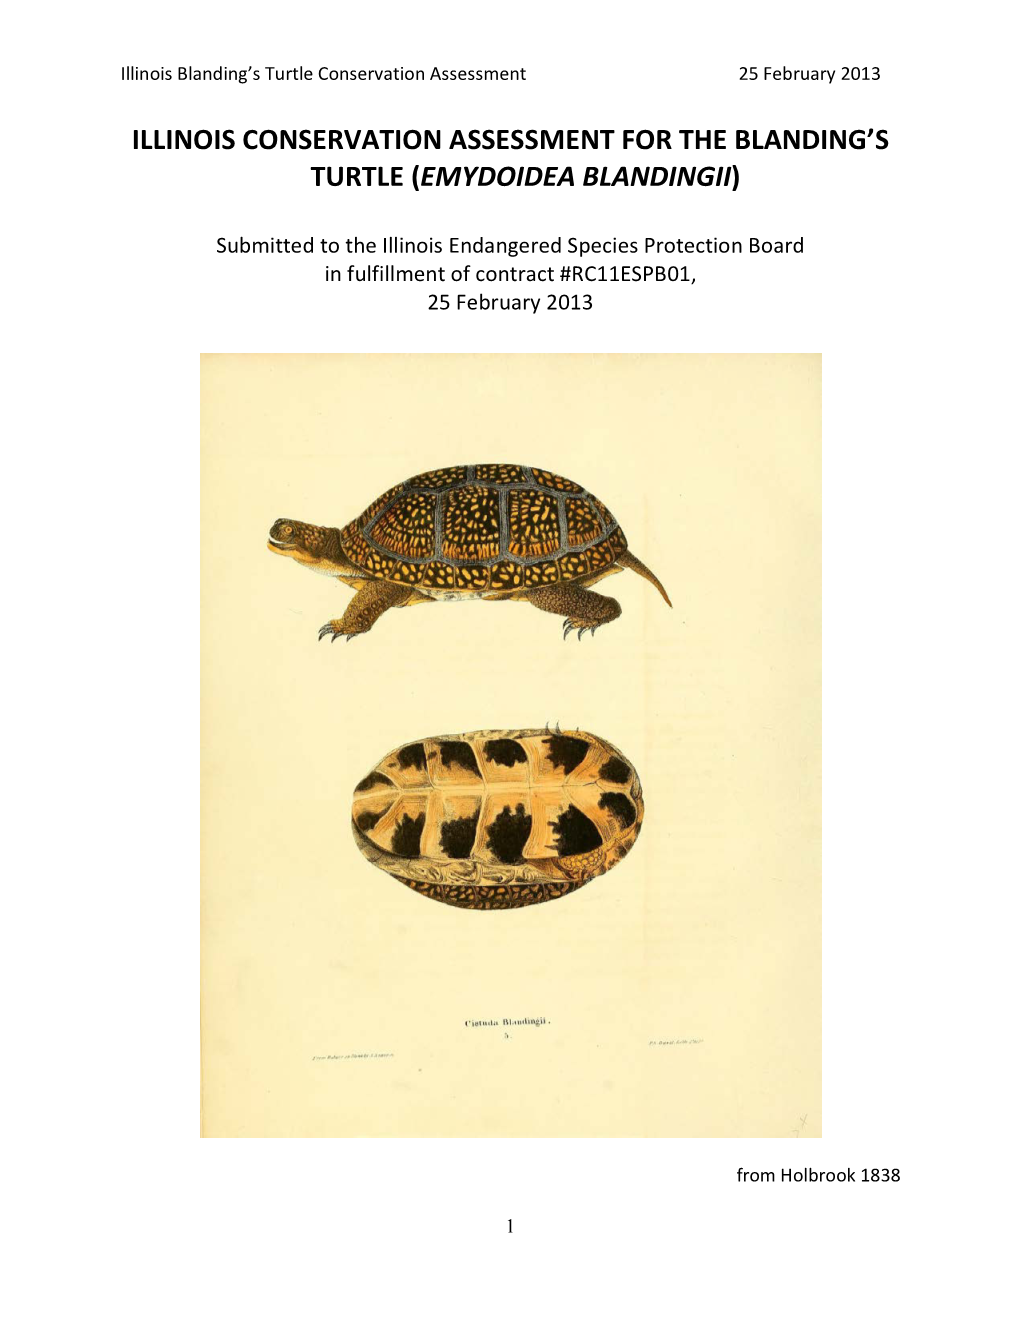 Illinois Conservation Assessment for the Blanding's Turtle (Emydoidea